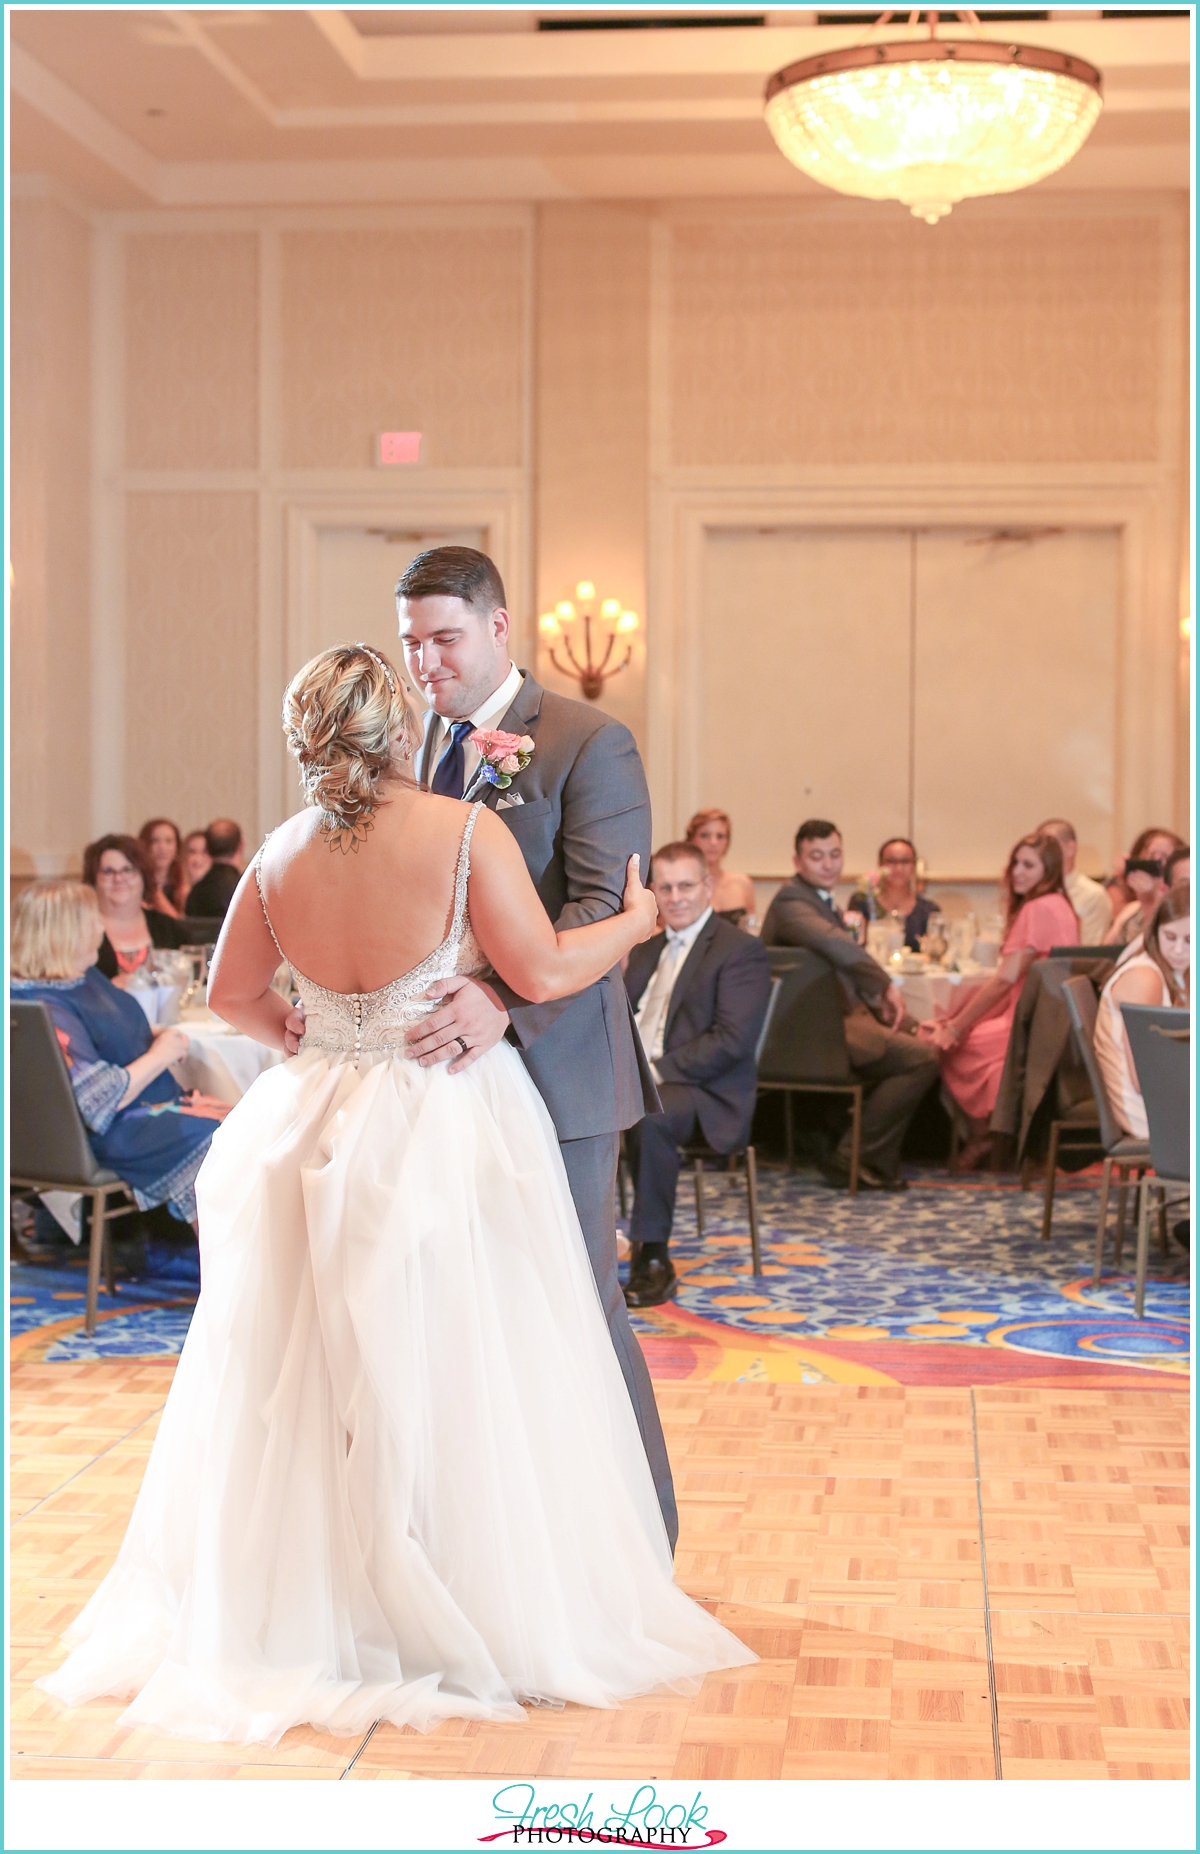 romantic first dance at the wedding